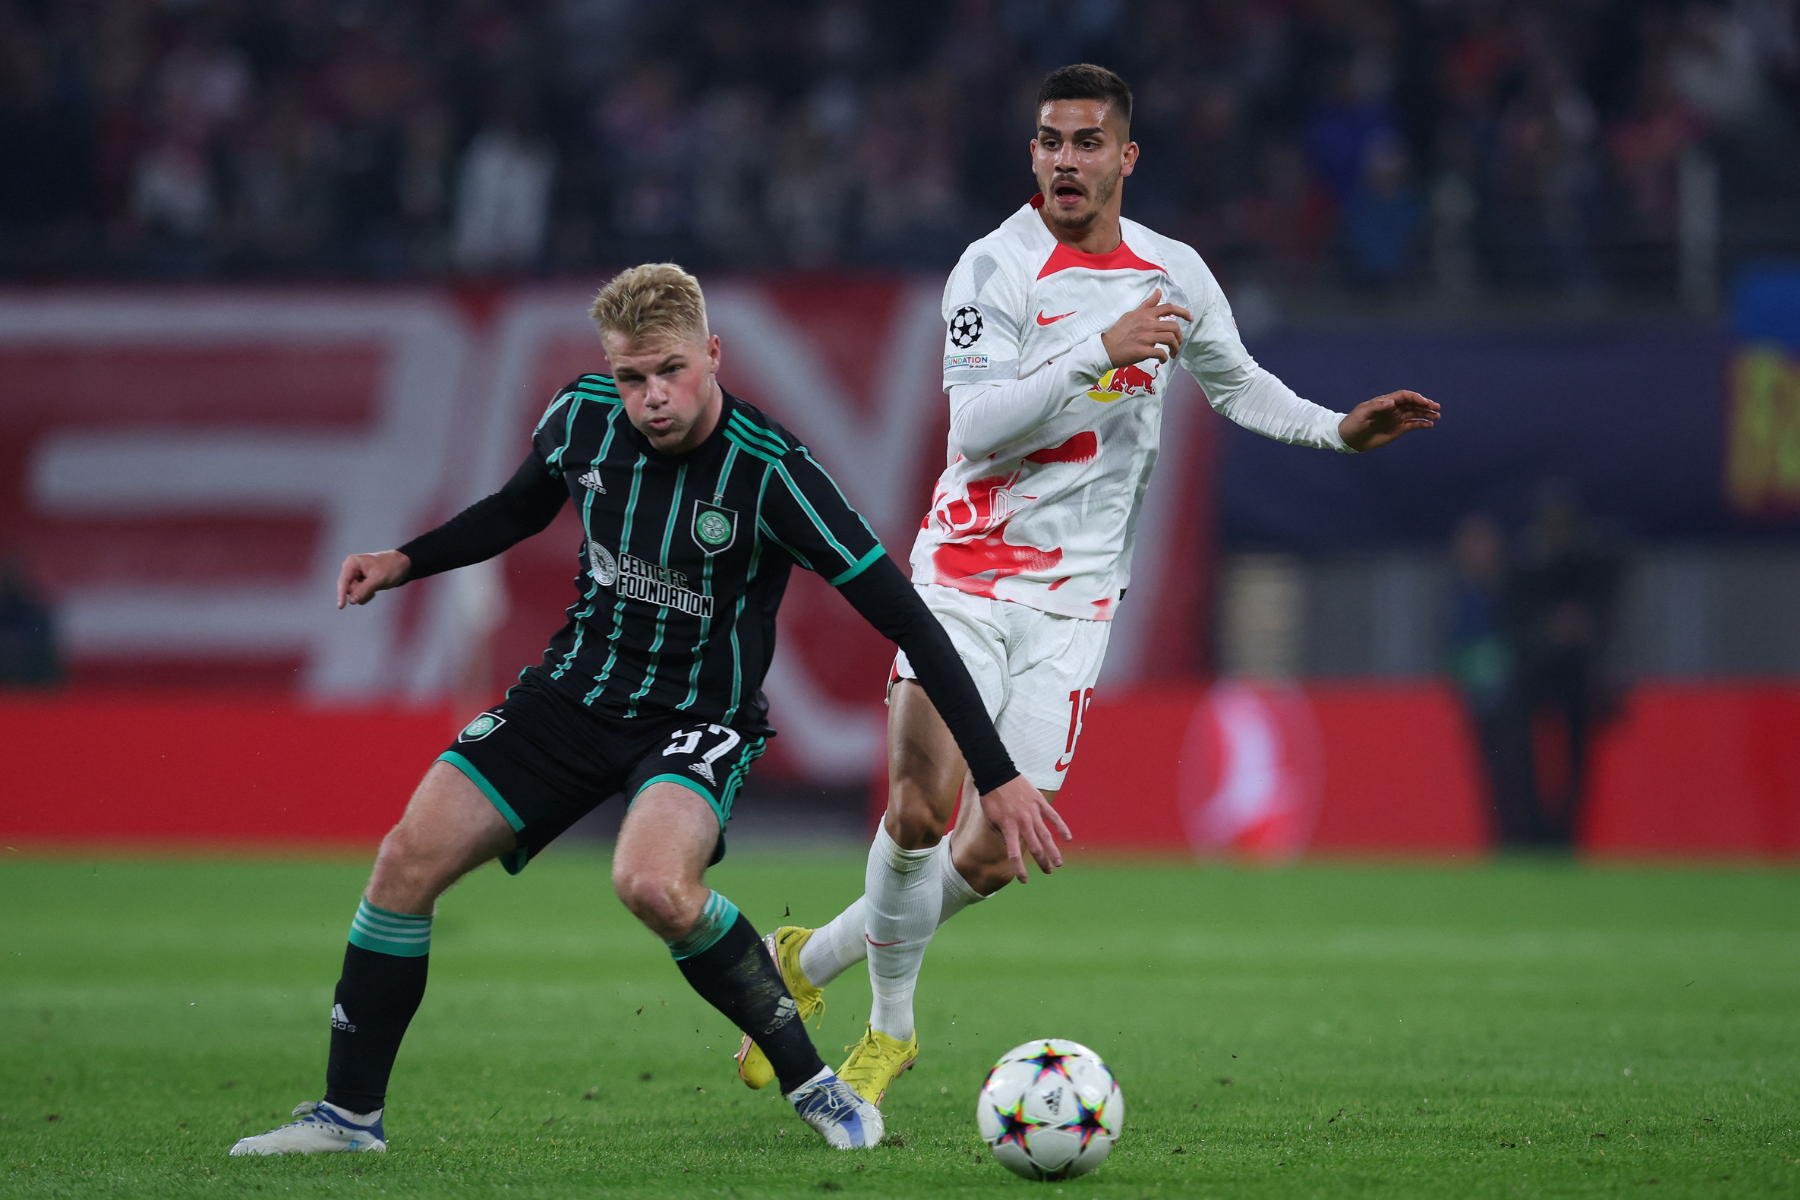 Stephen Welsh earns his Champions League wings in Red Bull Arena - but Celtic fail to sparkle in Leipzig loss